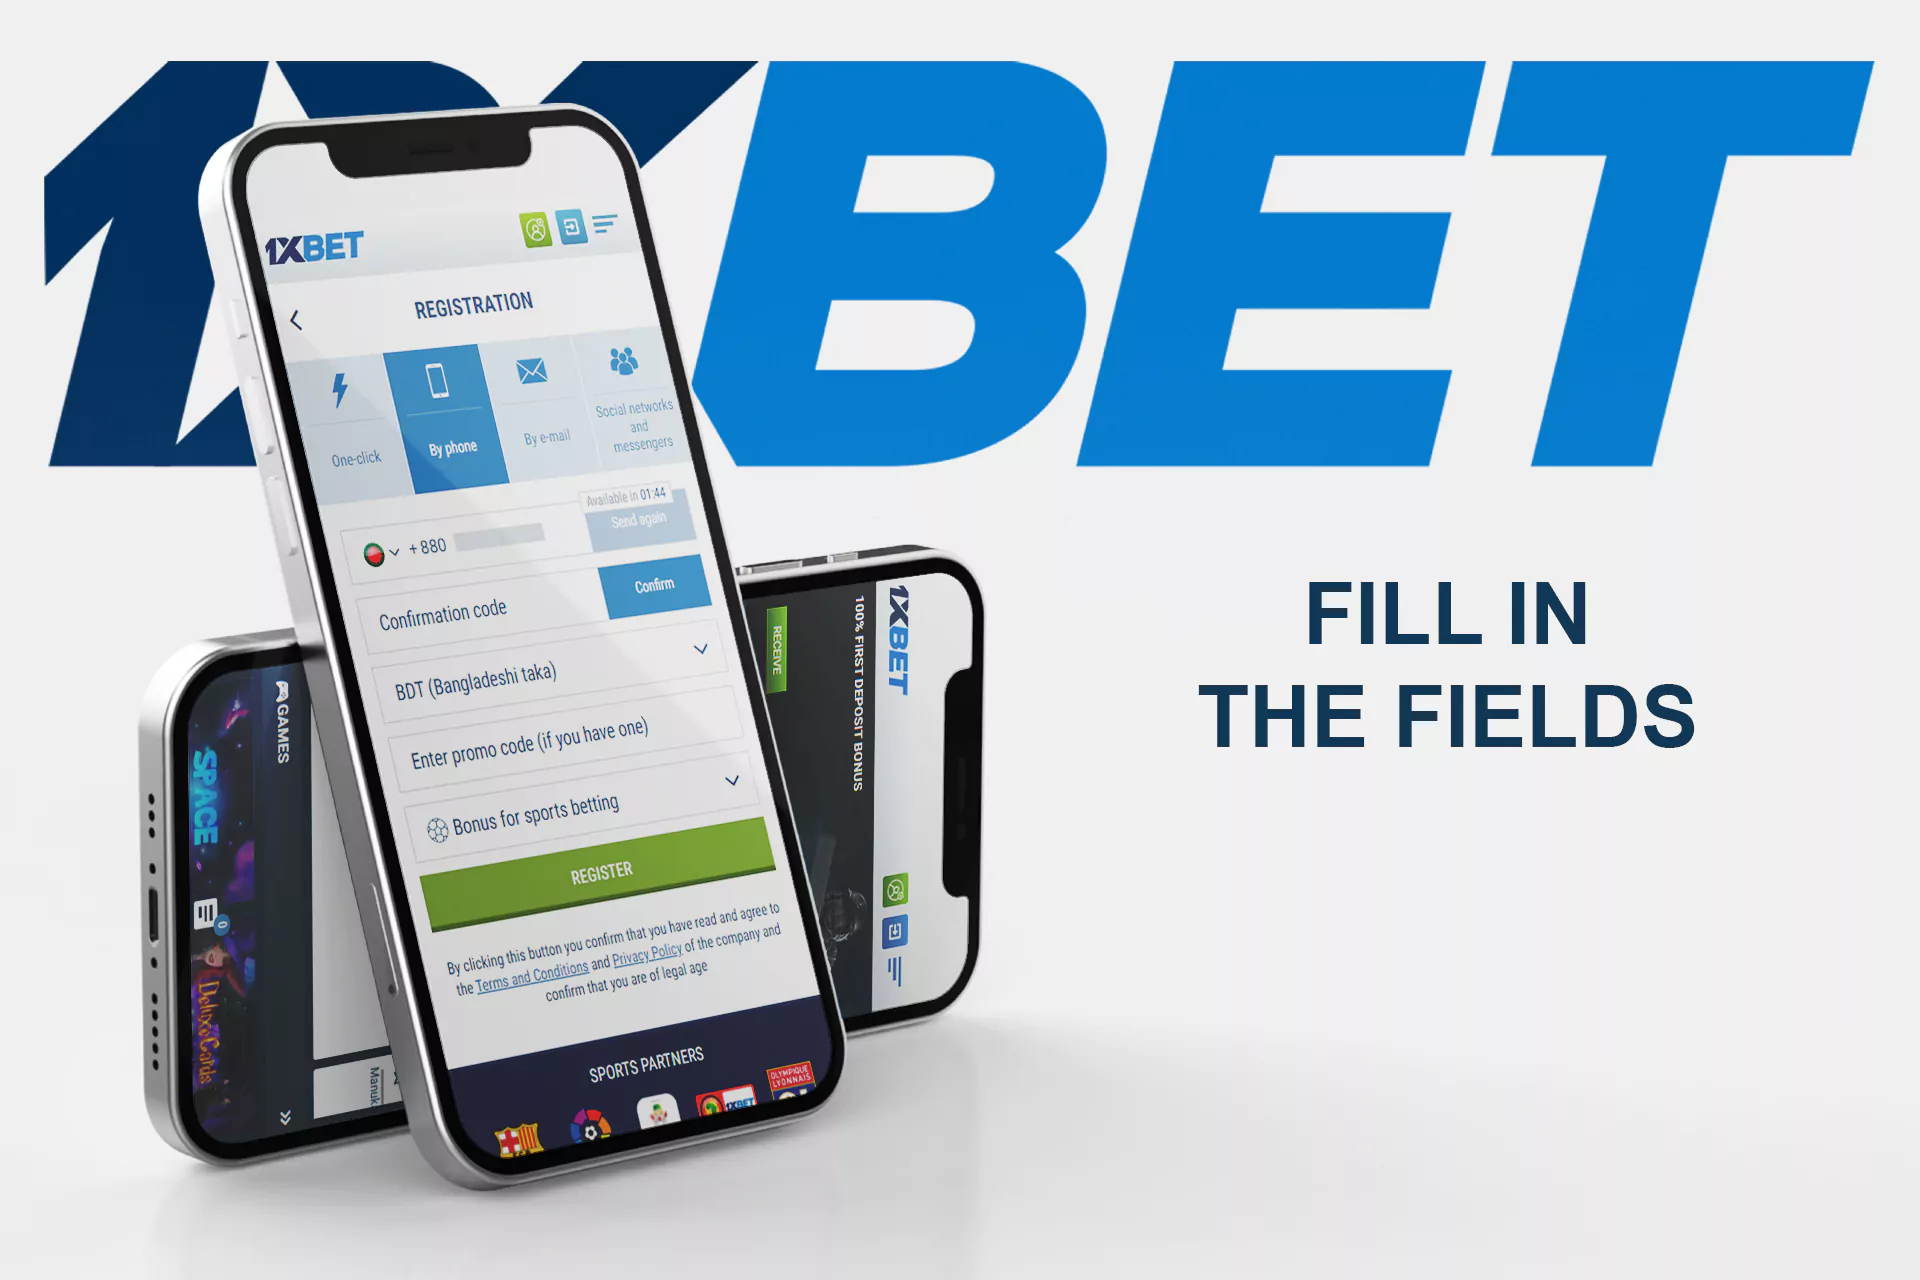 Fill in your number and confirm the registration at the 1xBet website.